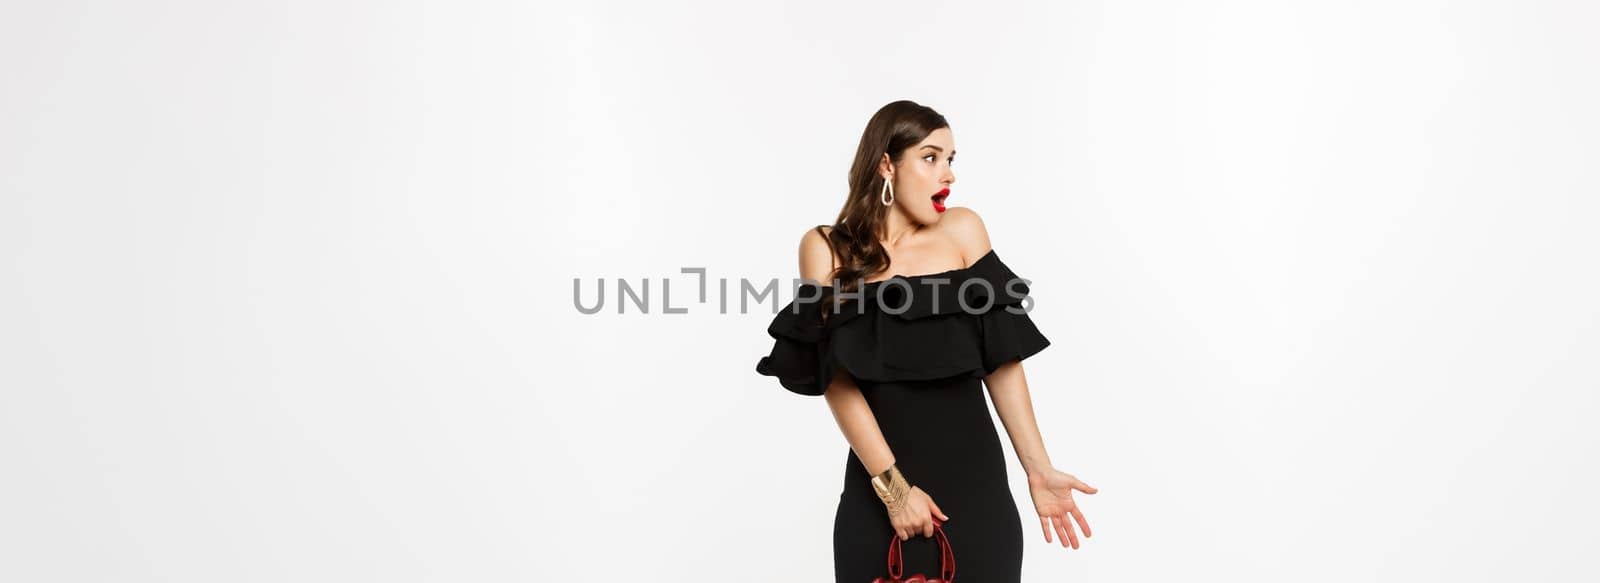 Beauty and fashion concept. Full length of surprised woman in elegant dress, heels looking left confused, holding purse, cant understand what happening, white background.